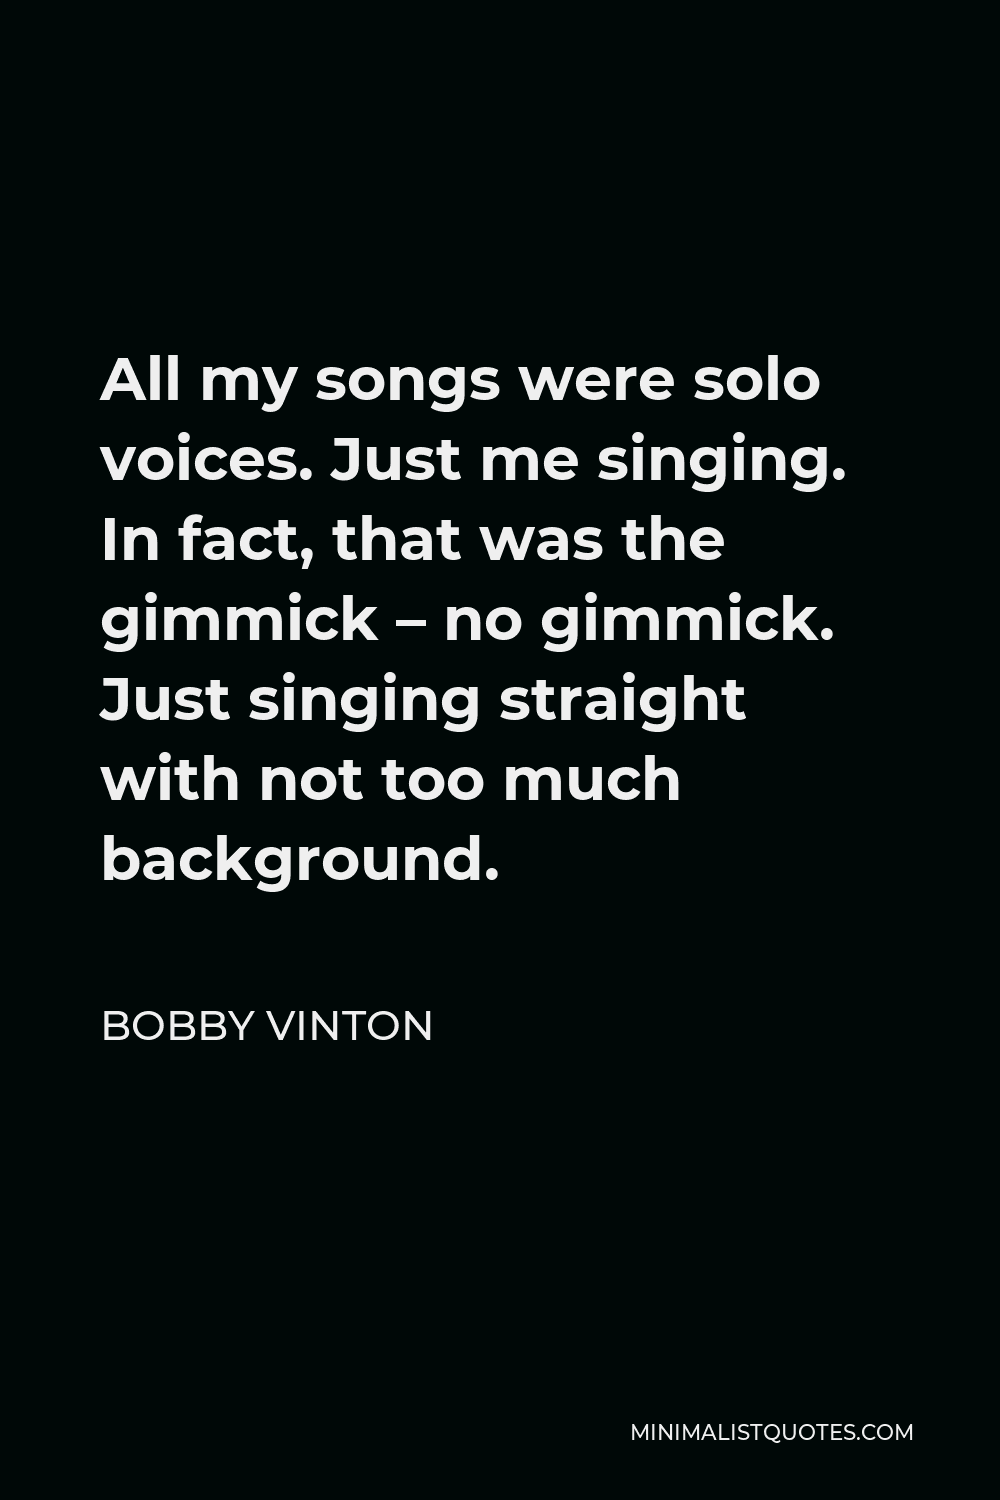 Bobby Vinton Quote - All my songs were solo voices. Just me singing. In fact, that was the gimmick – no gimmick. Just singing straight with not too much background.